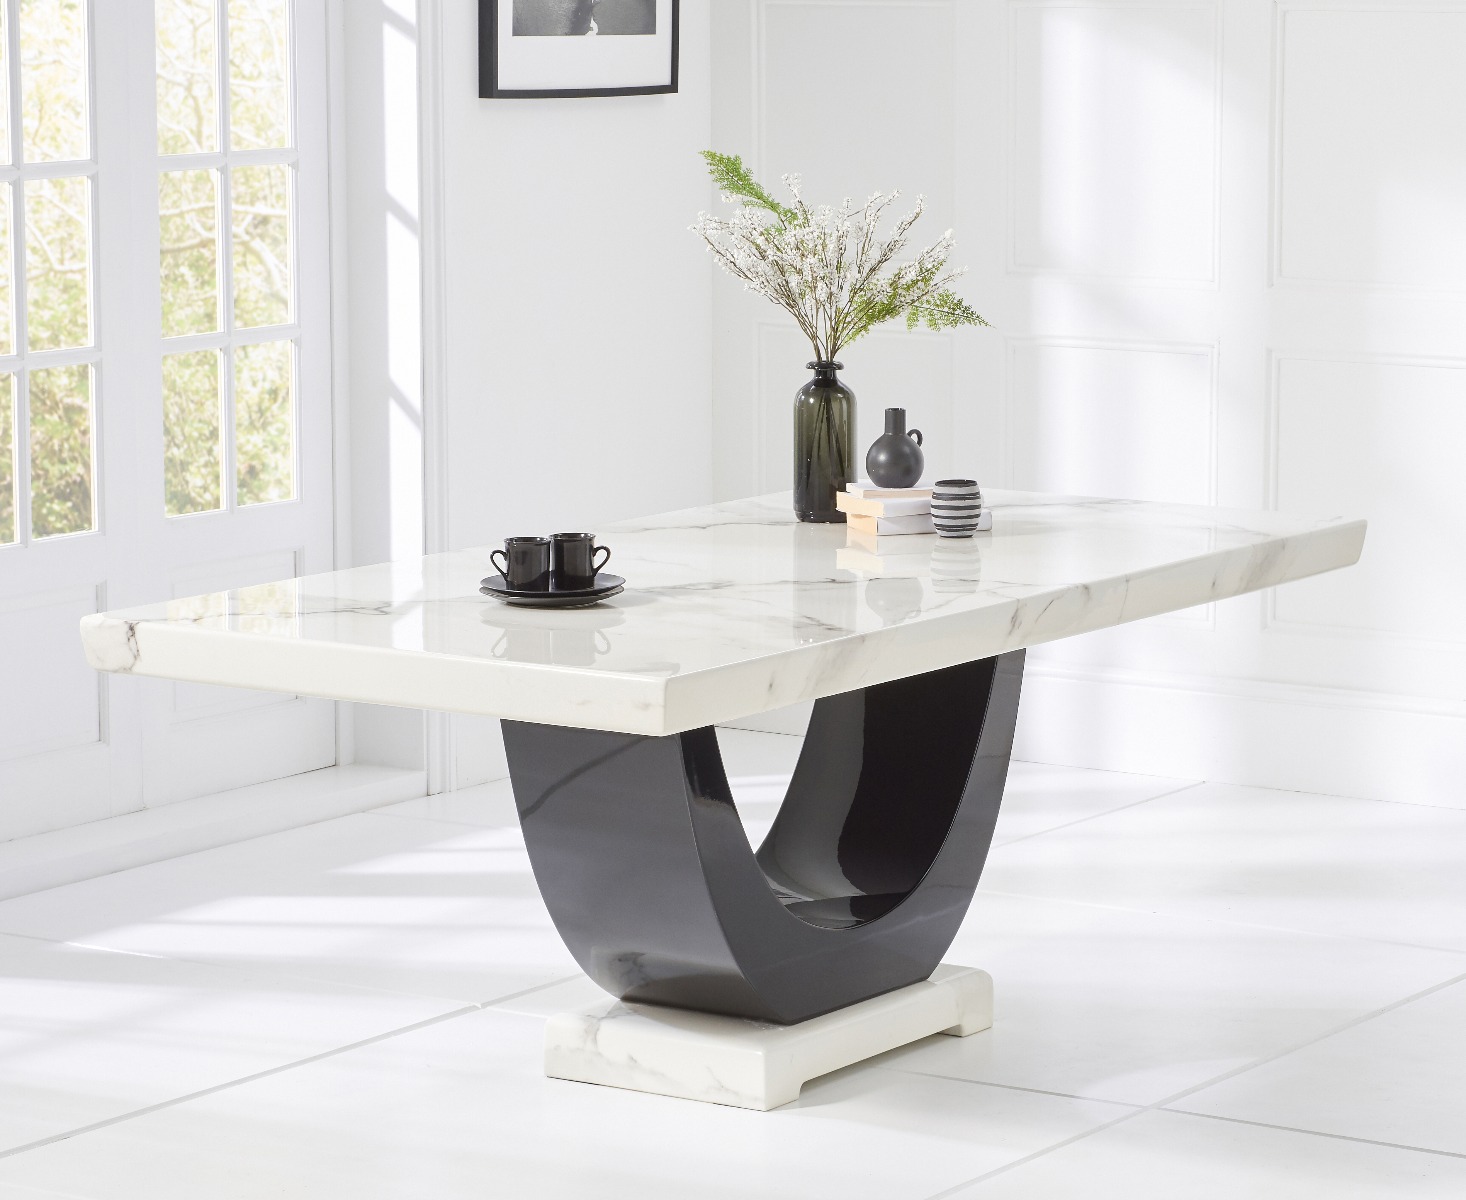 Photo 3 of Raphael 170cm white and black pedestal marble dining table with 6 cream francesca chairs